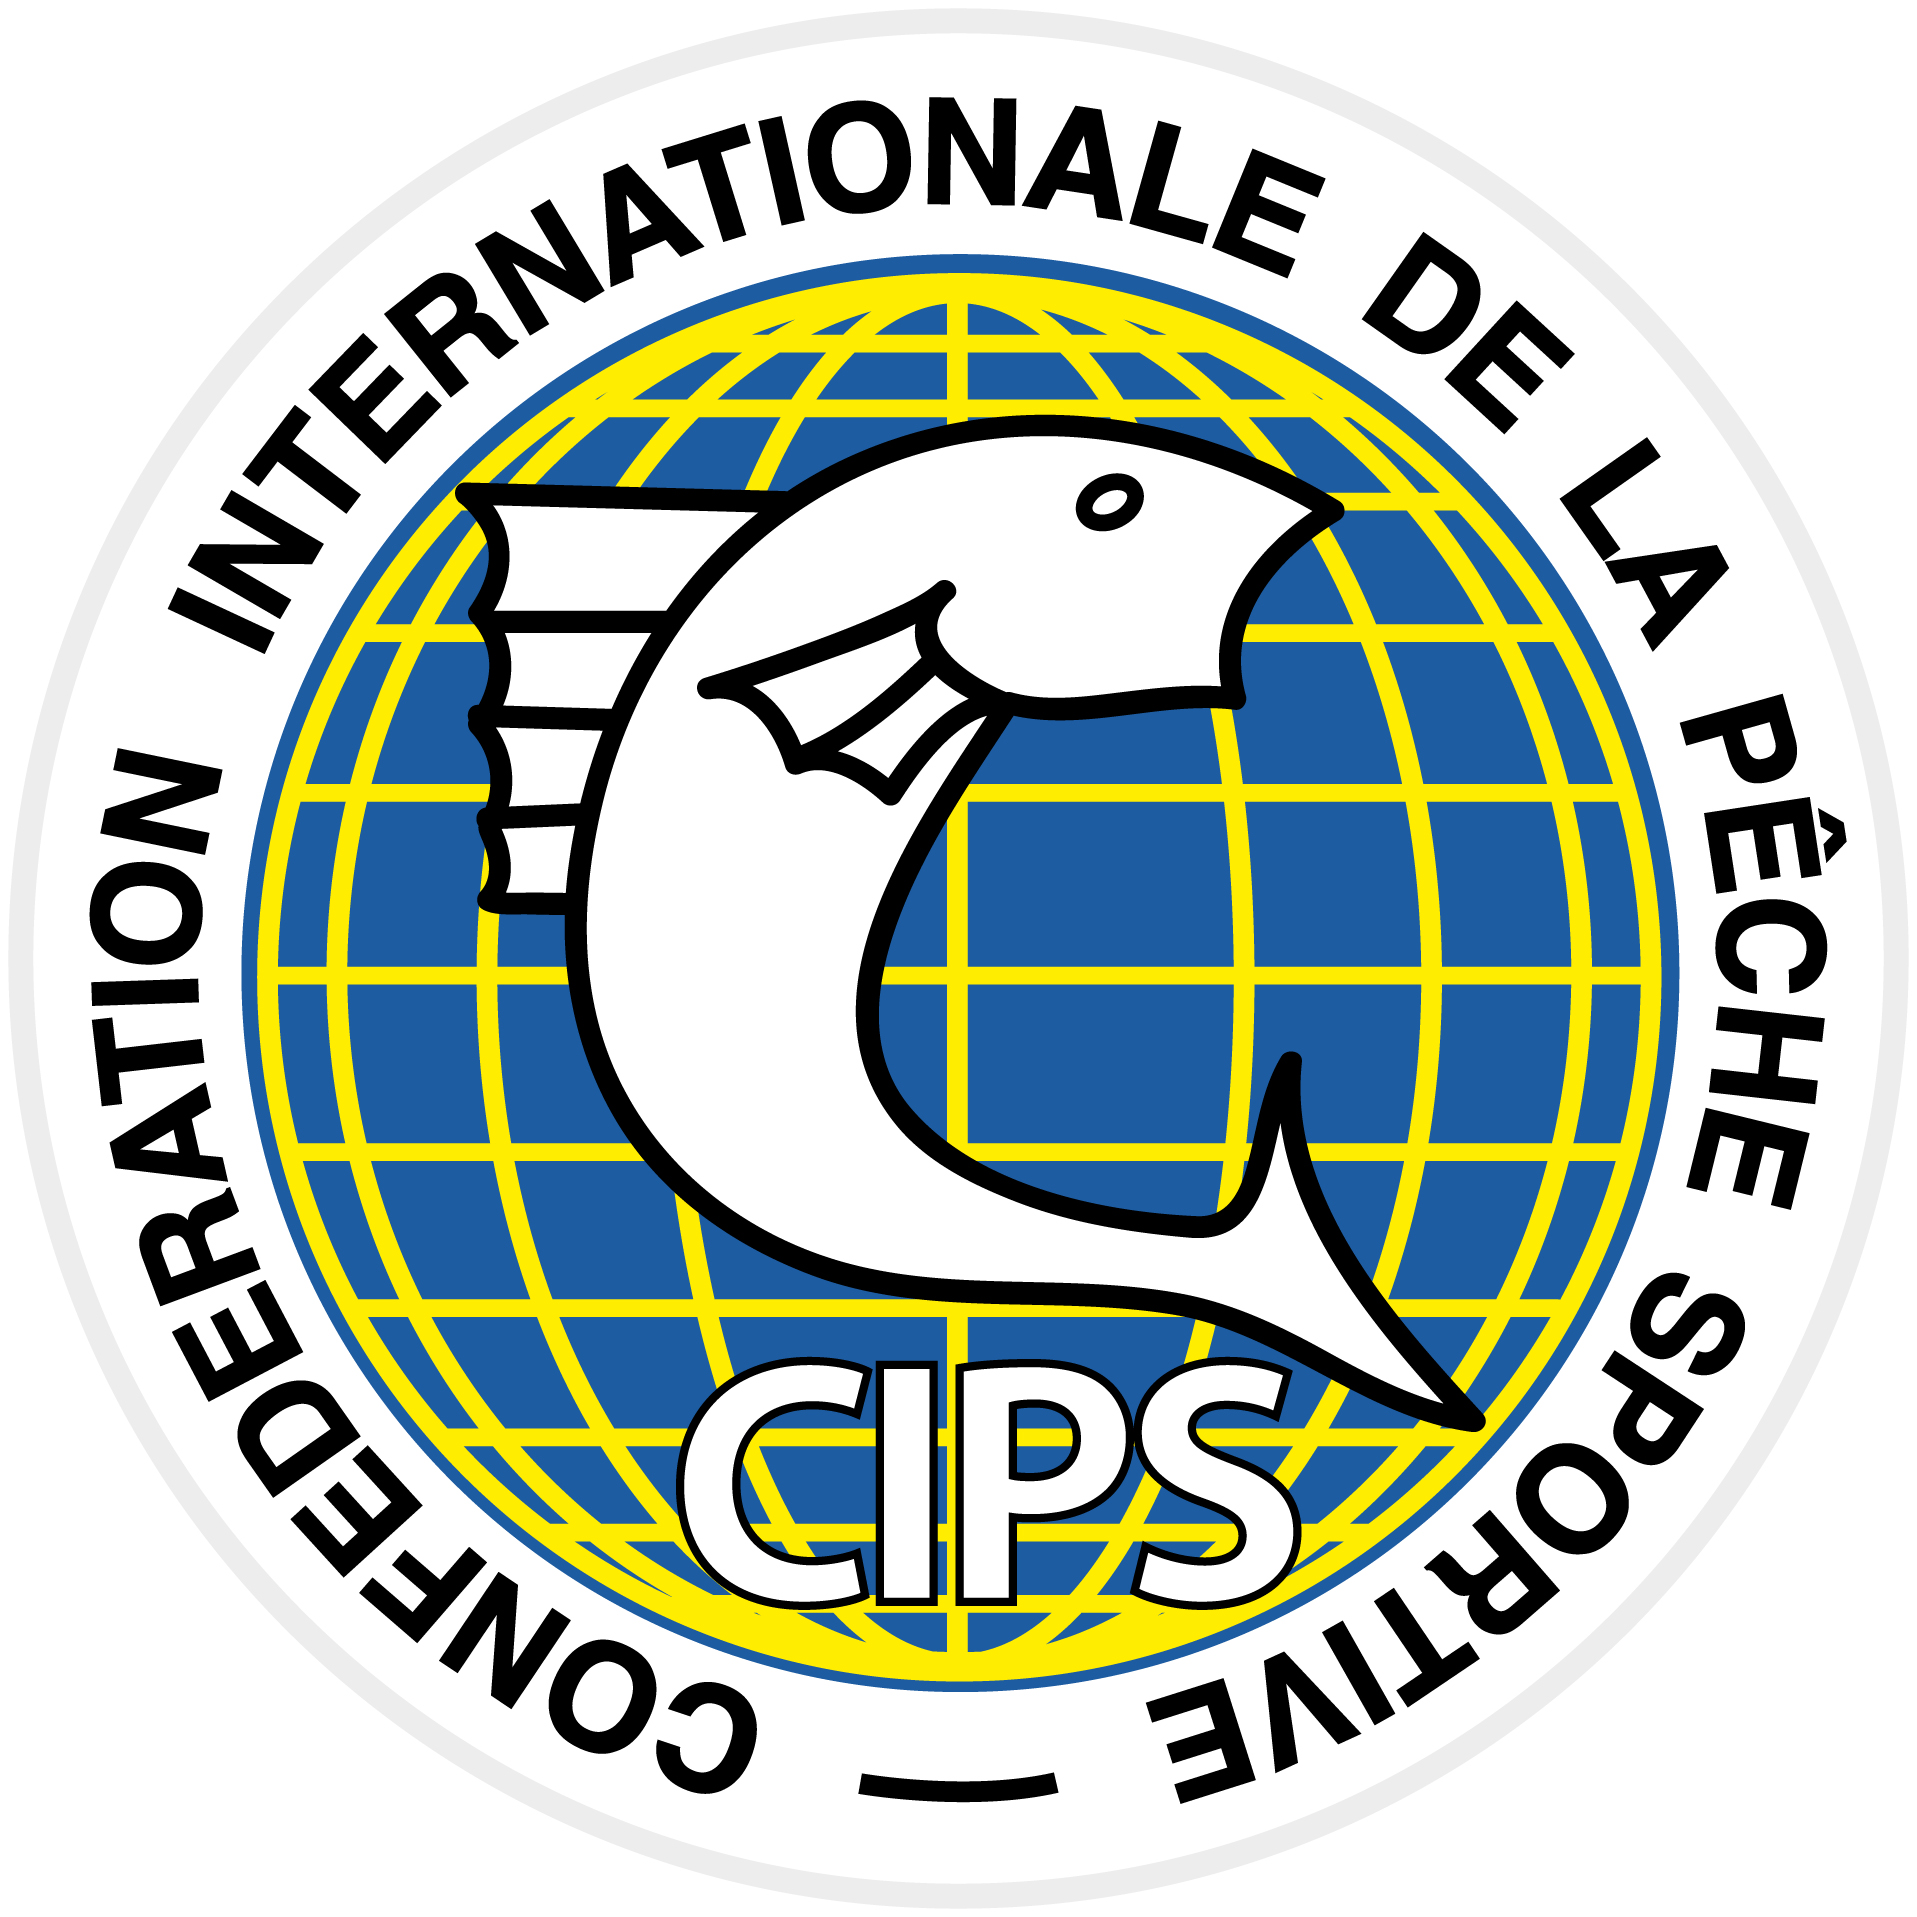 Cips Chartered Institute